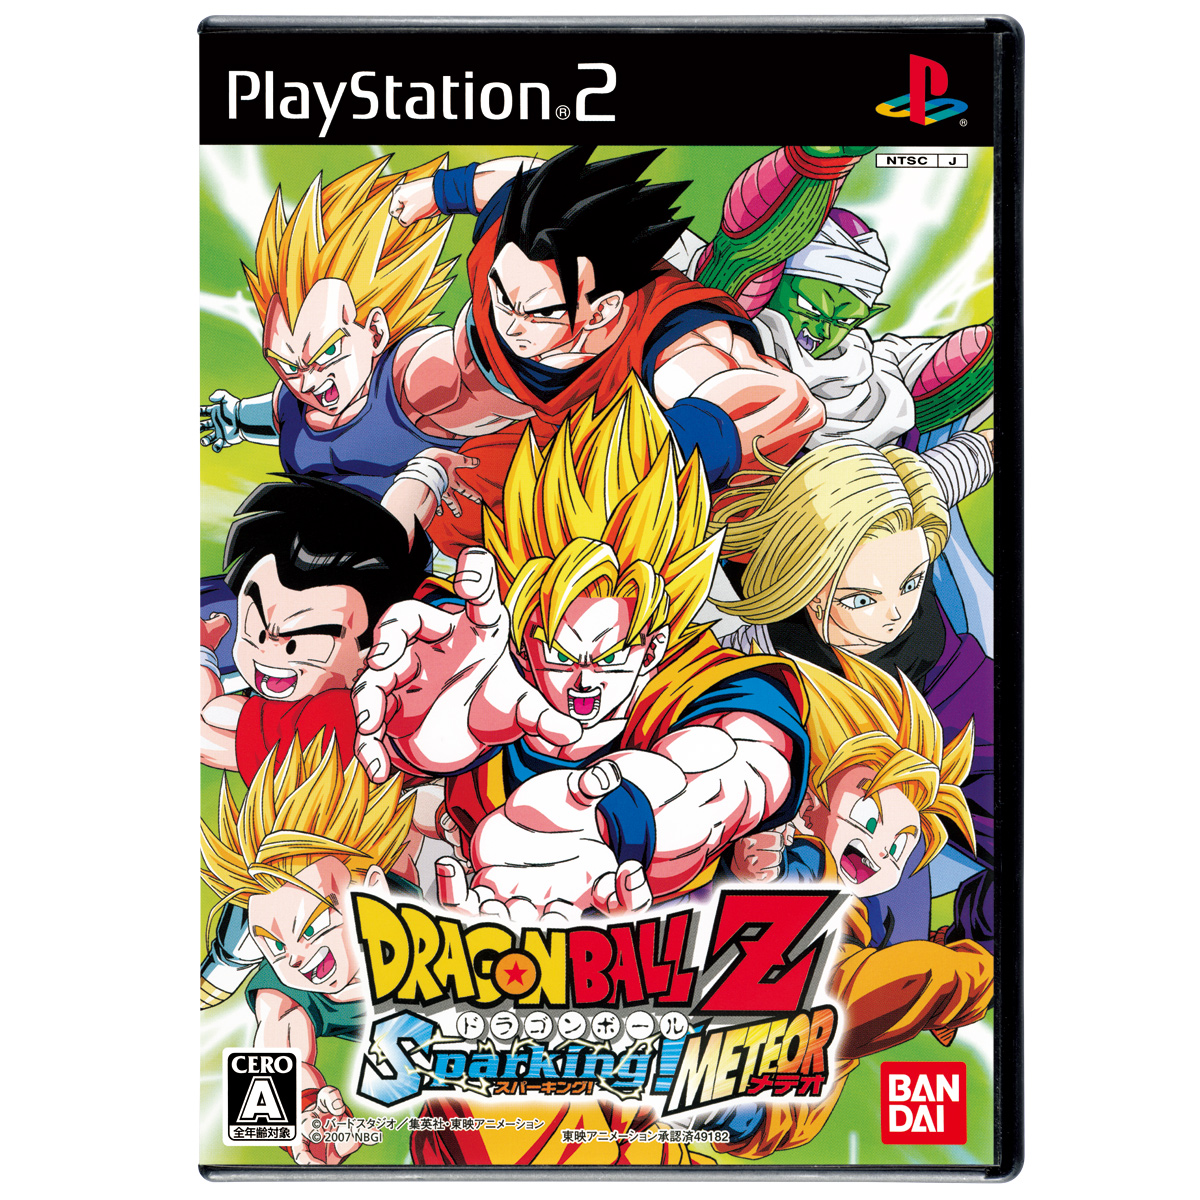 DRAGON BALL OFFICIAL SITE, DATABASE, GAME